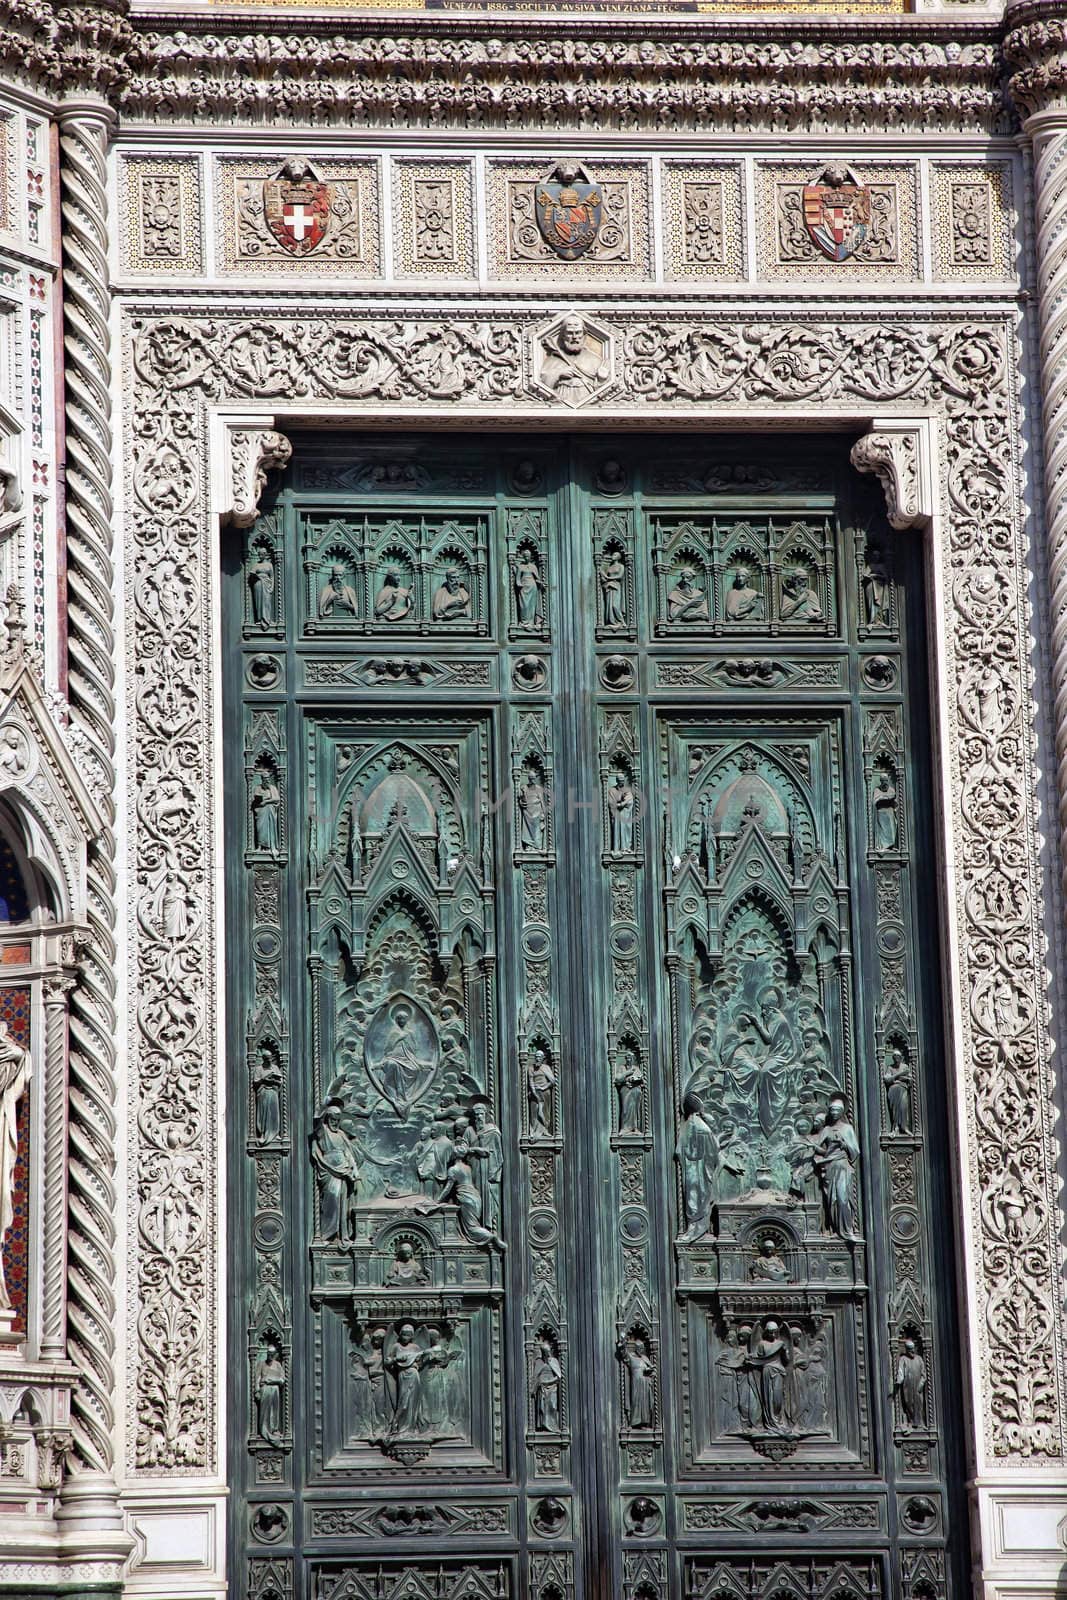 Bronze Door Papal Symbol Duomo Basilica Cathedral Church Coronation Mary Bibilical Images Florence Italy